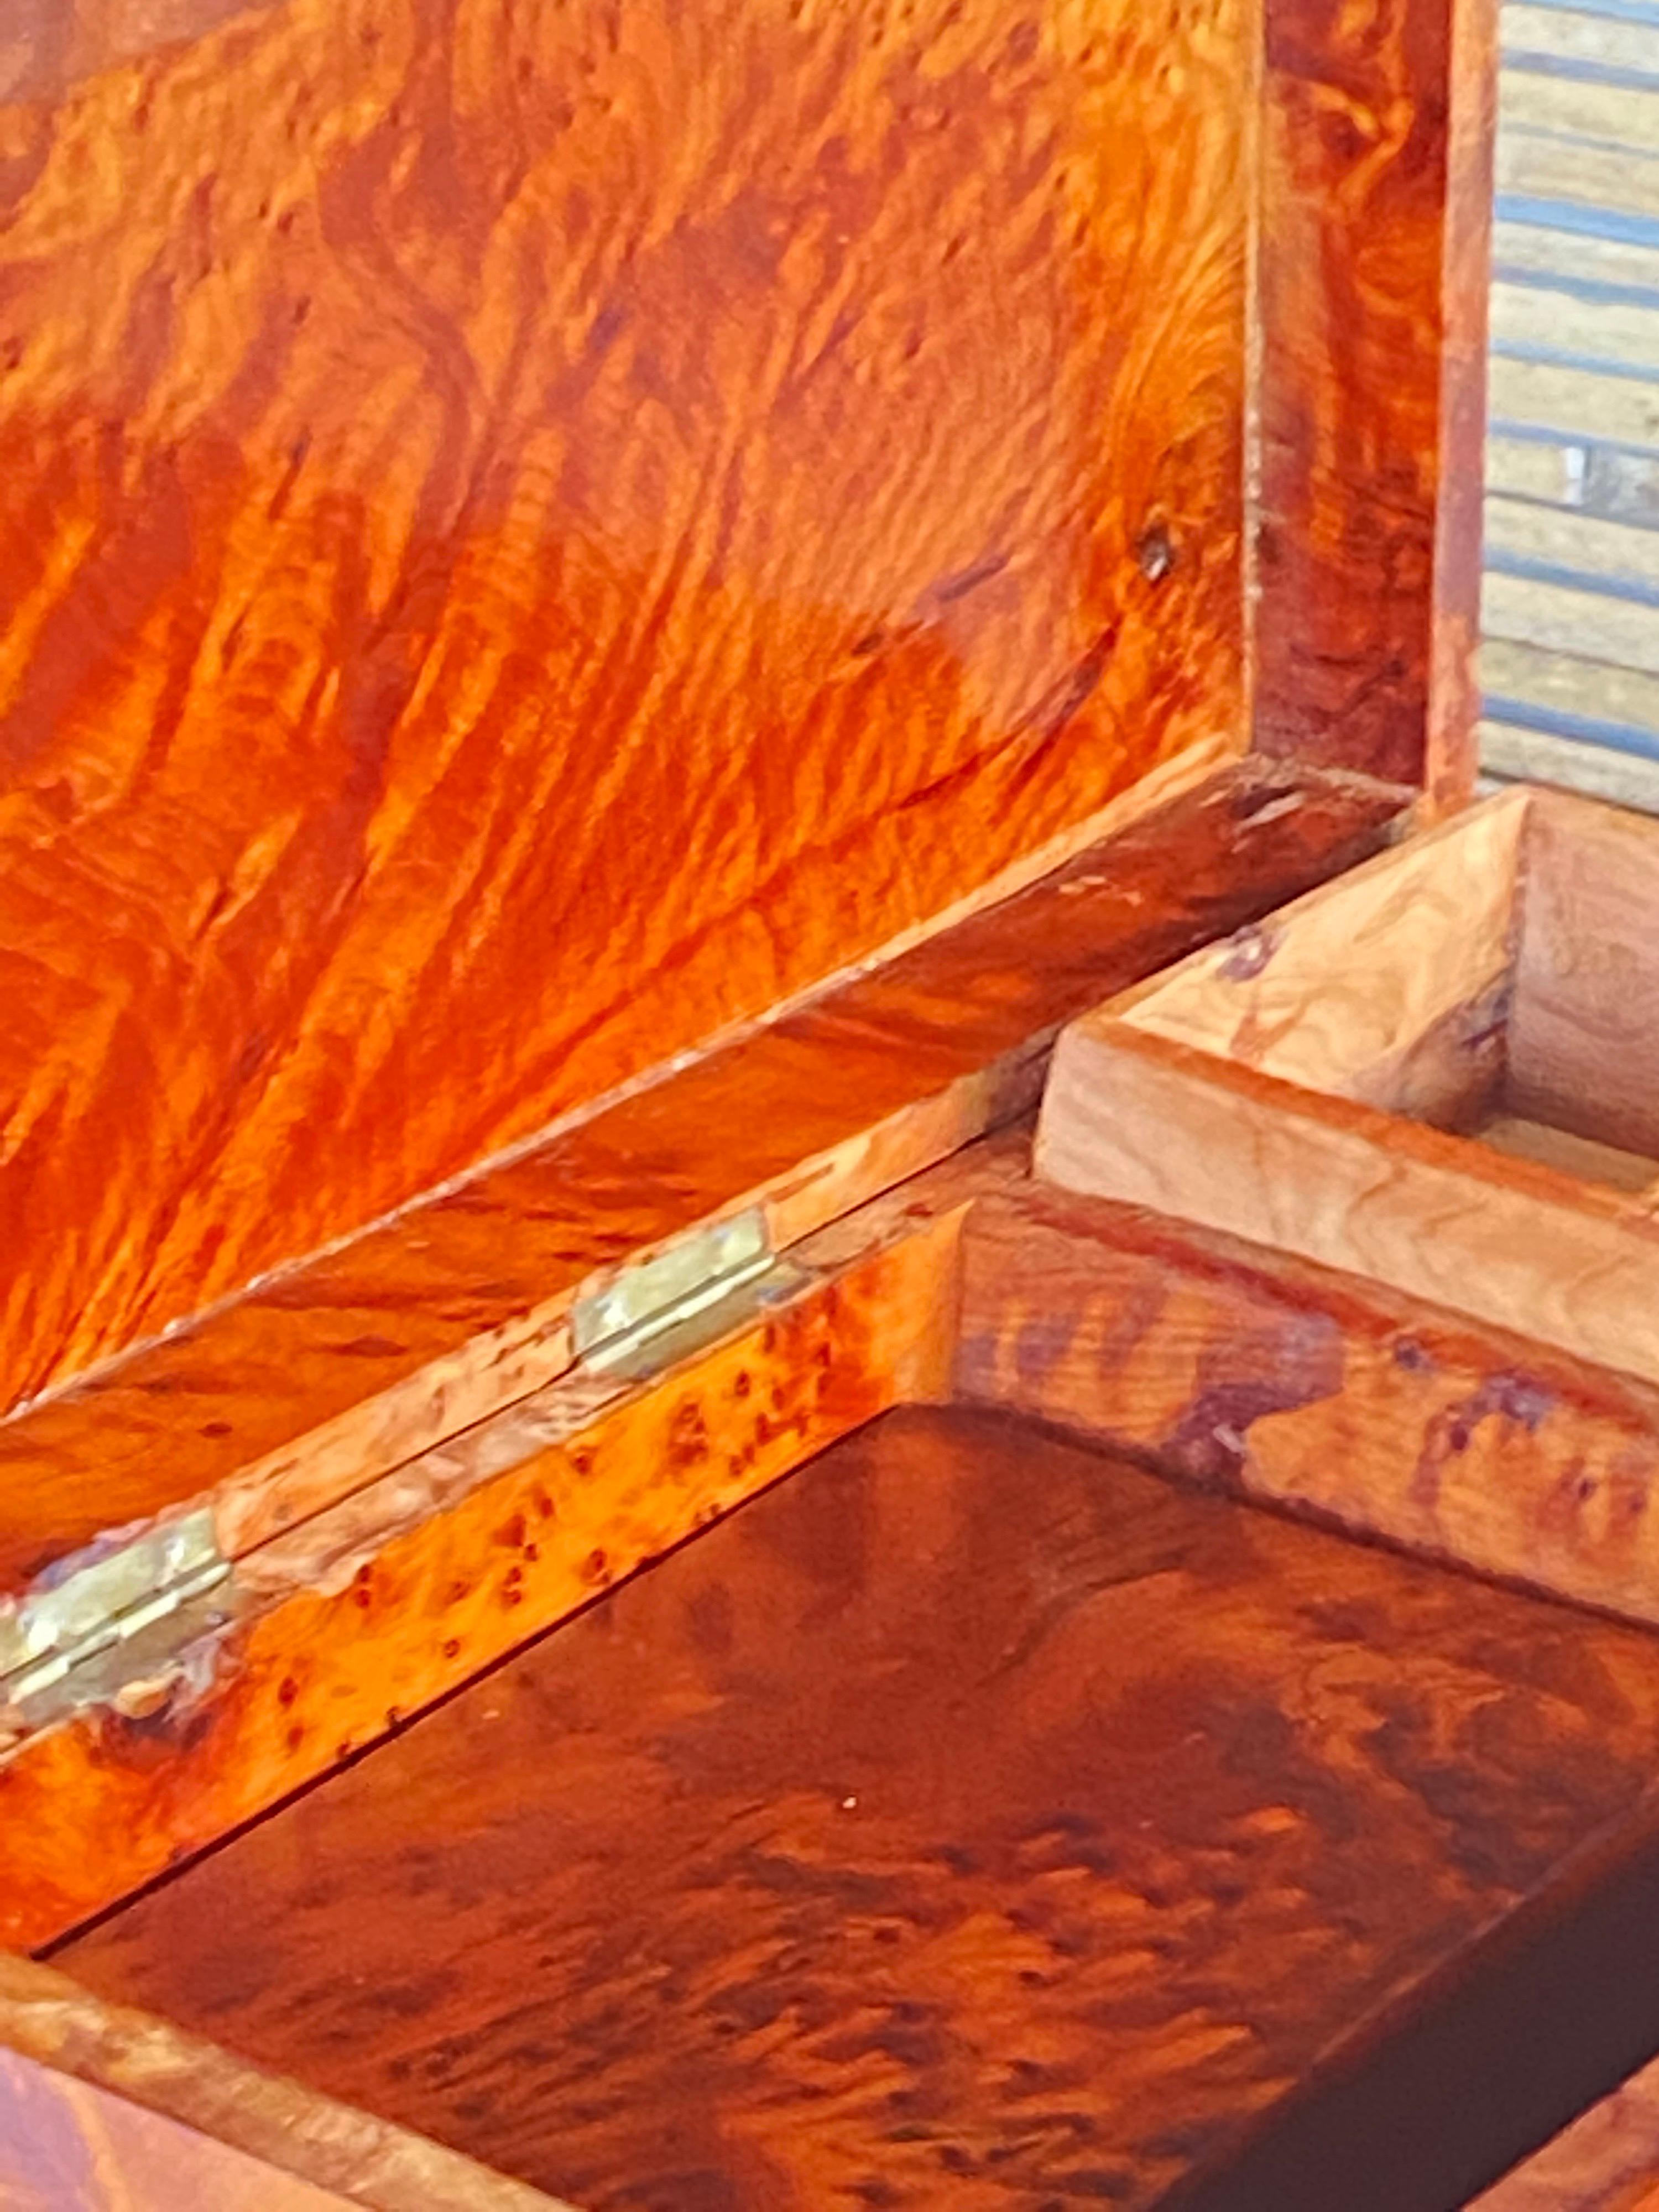 Cigar Box, in Burl Wood, England 1970, Brown Color, with a Second Box Inside 2